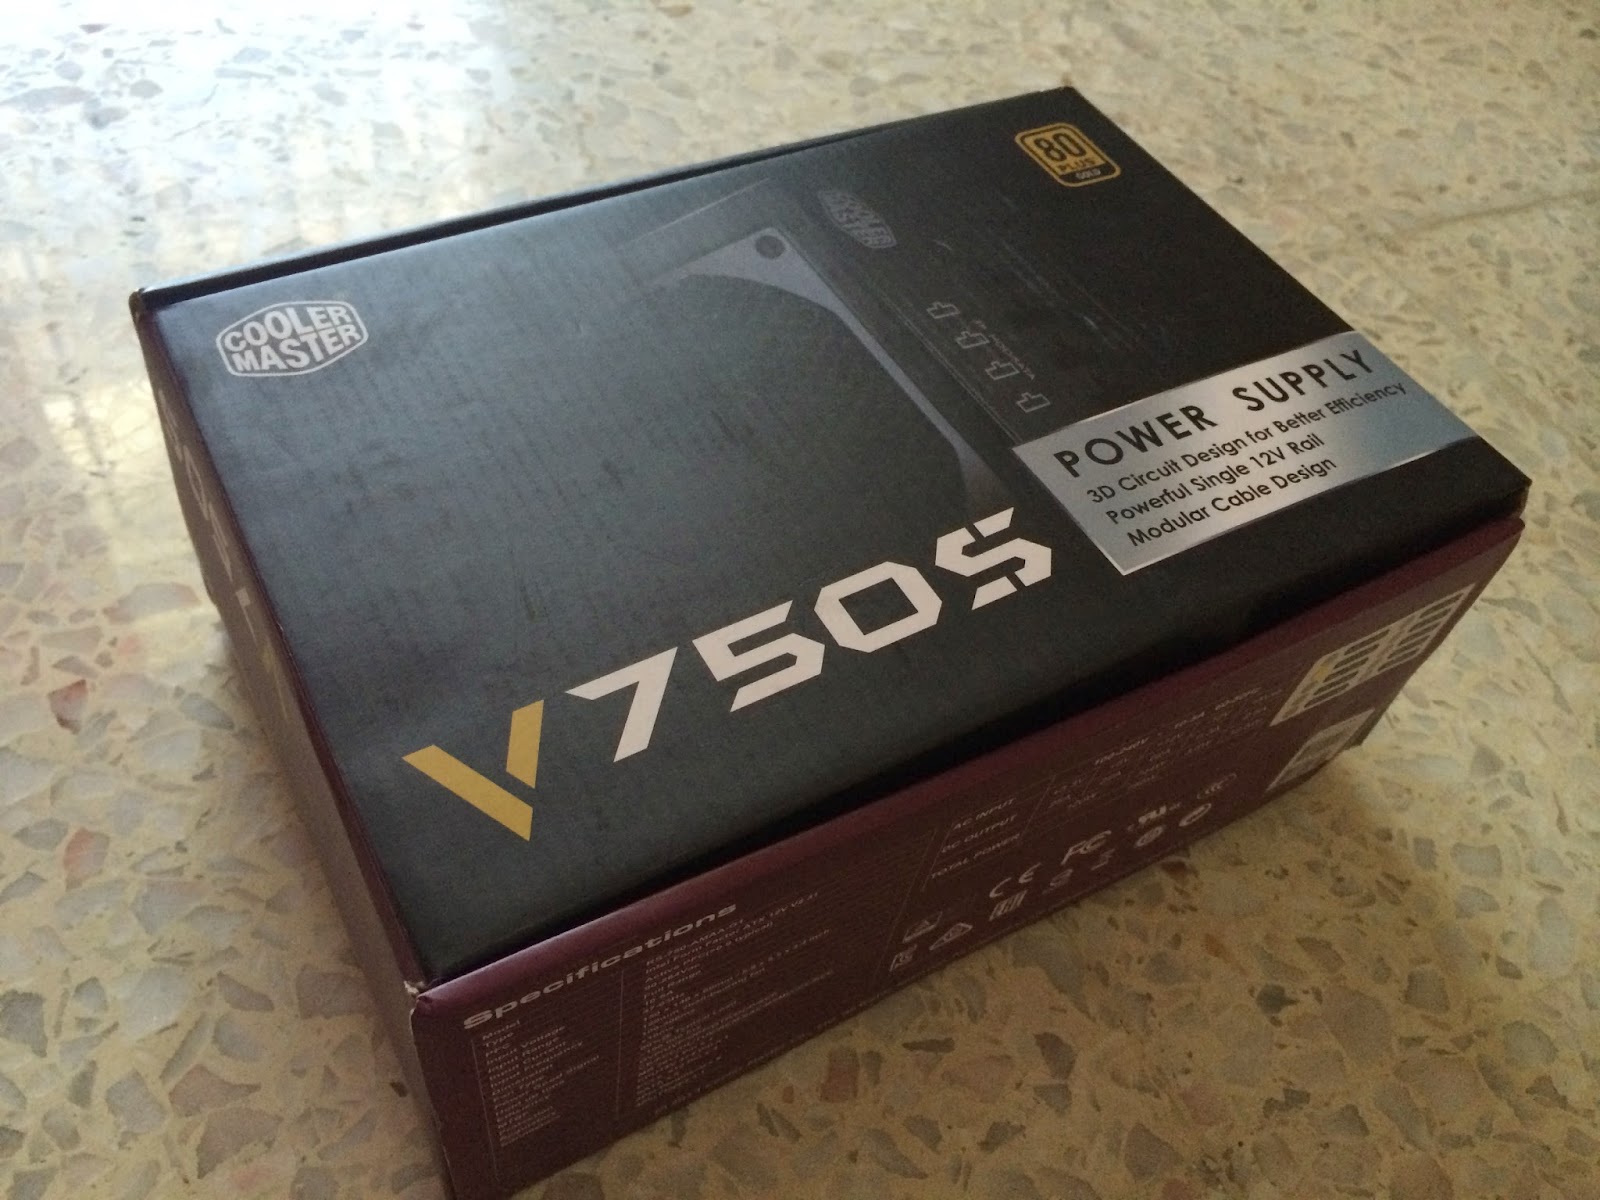 Cooler Master V750S Power Supply Unboxing & Overview 40